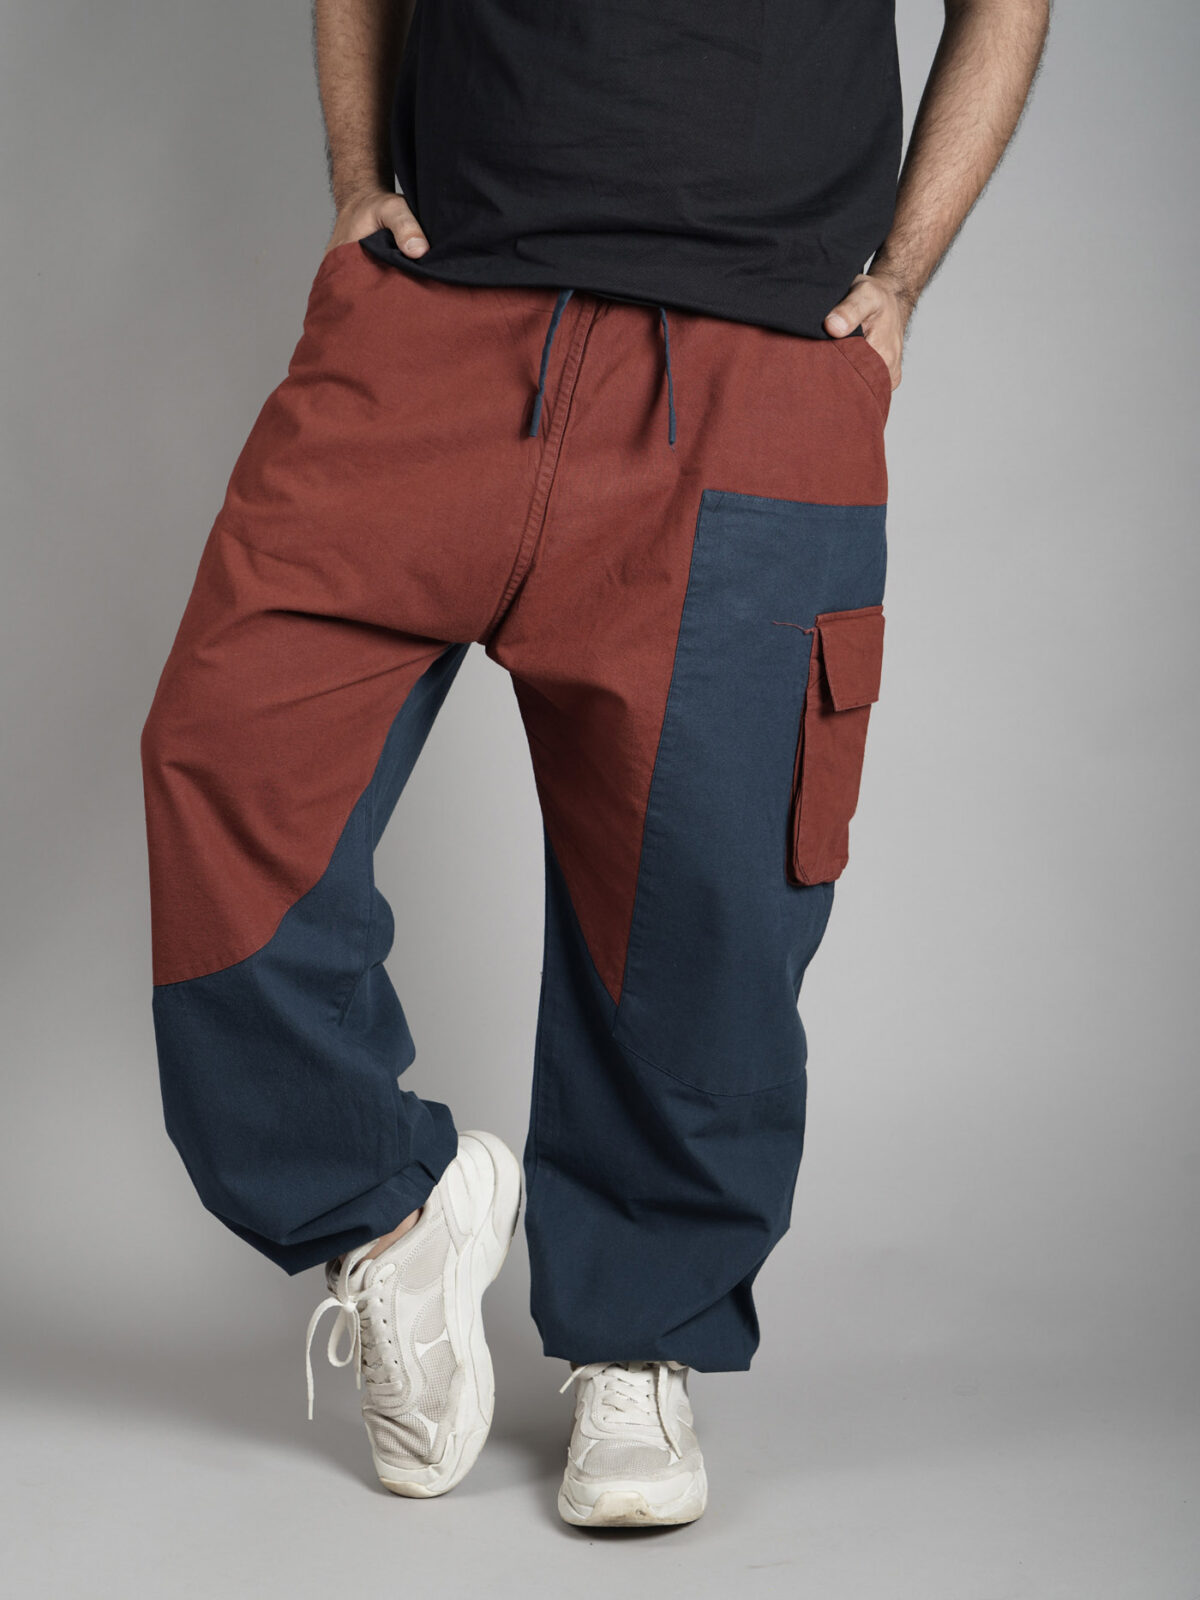 Duo Navy Maroon Earthy Hoppers – Unisex Pants For Men And Women ...